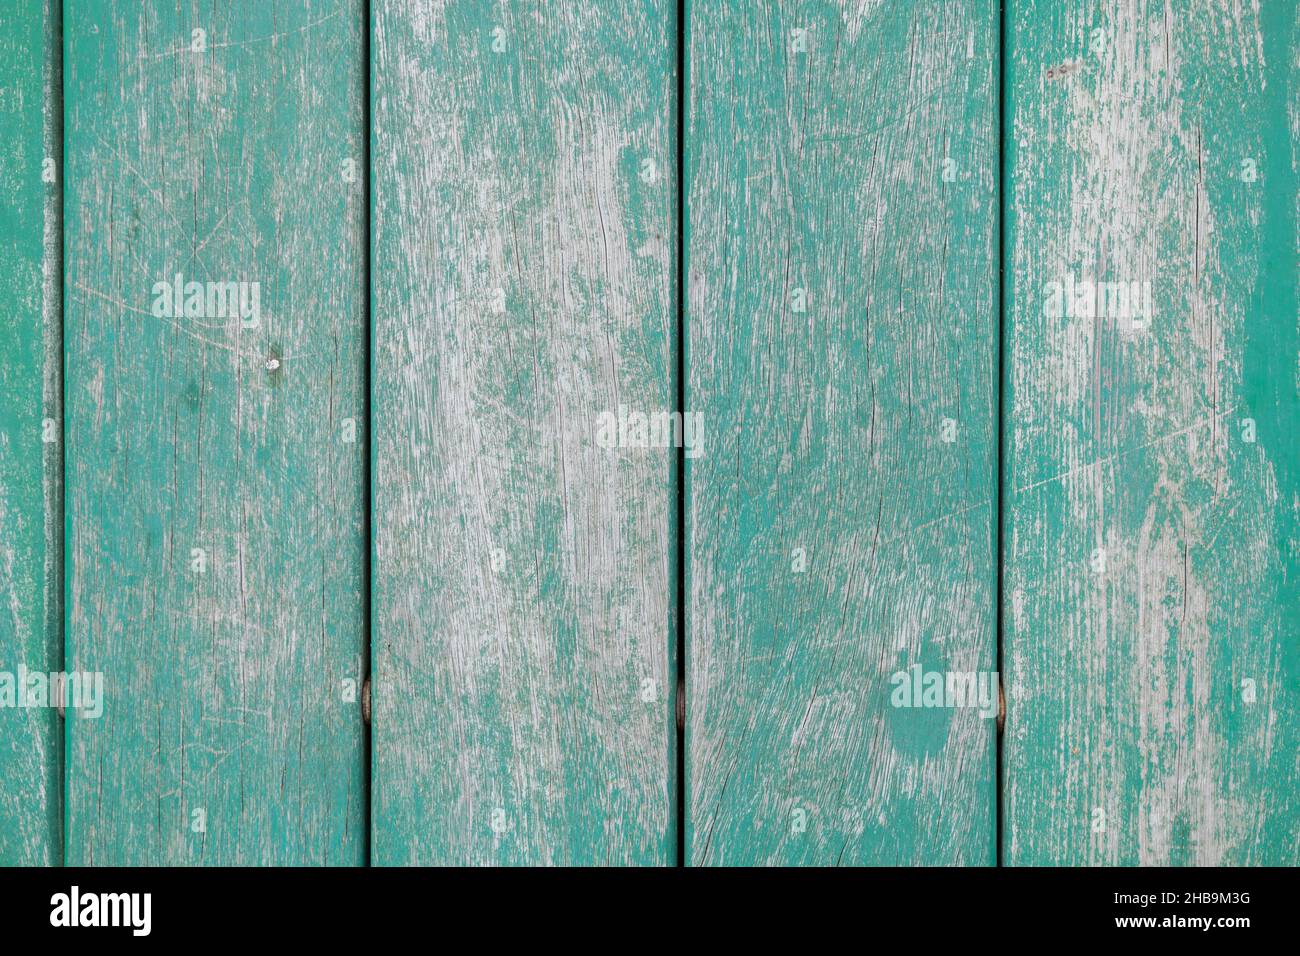 background with wooden plank with straight lines in turquoise color, detail of colorful worn material Stock Photo